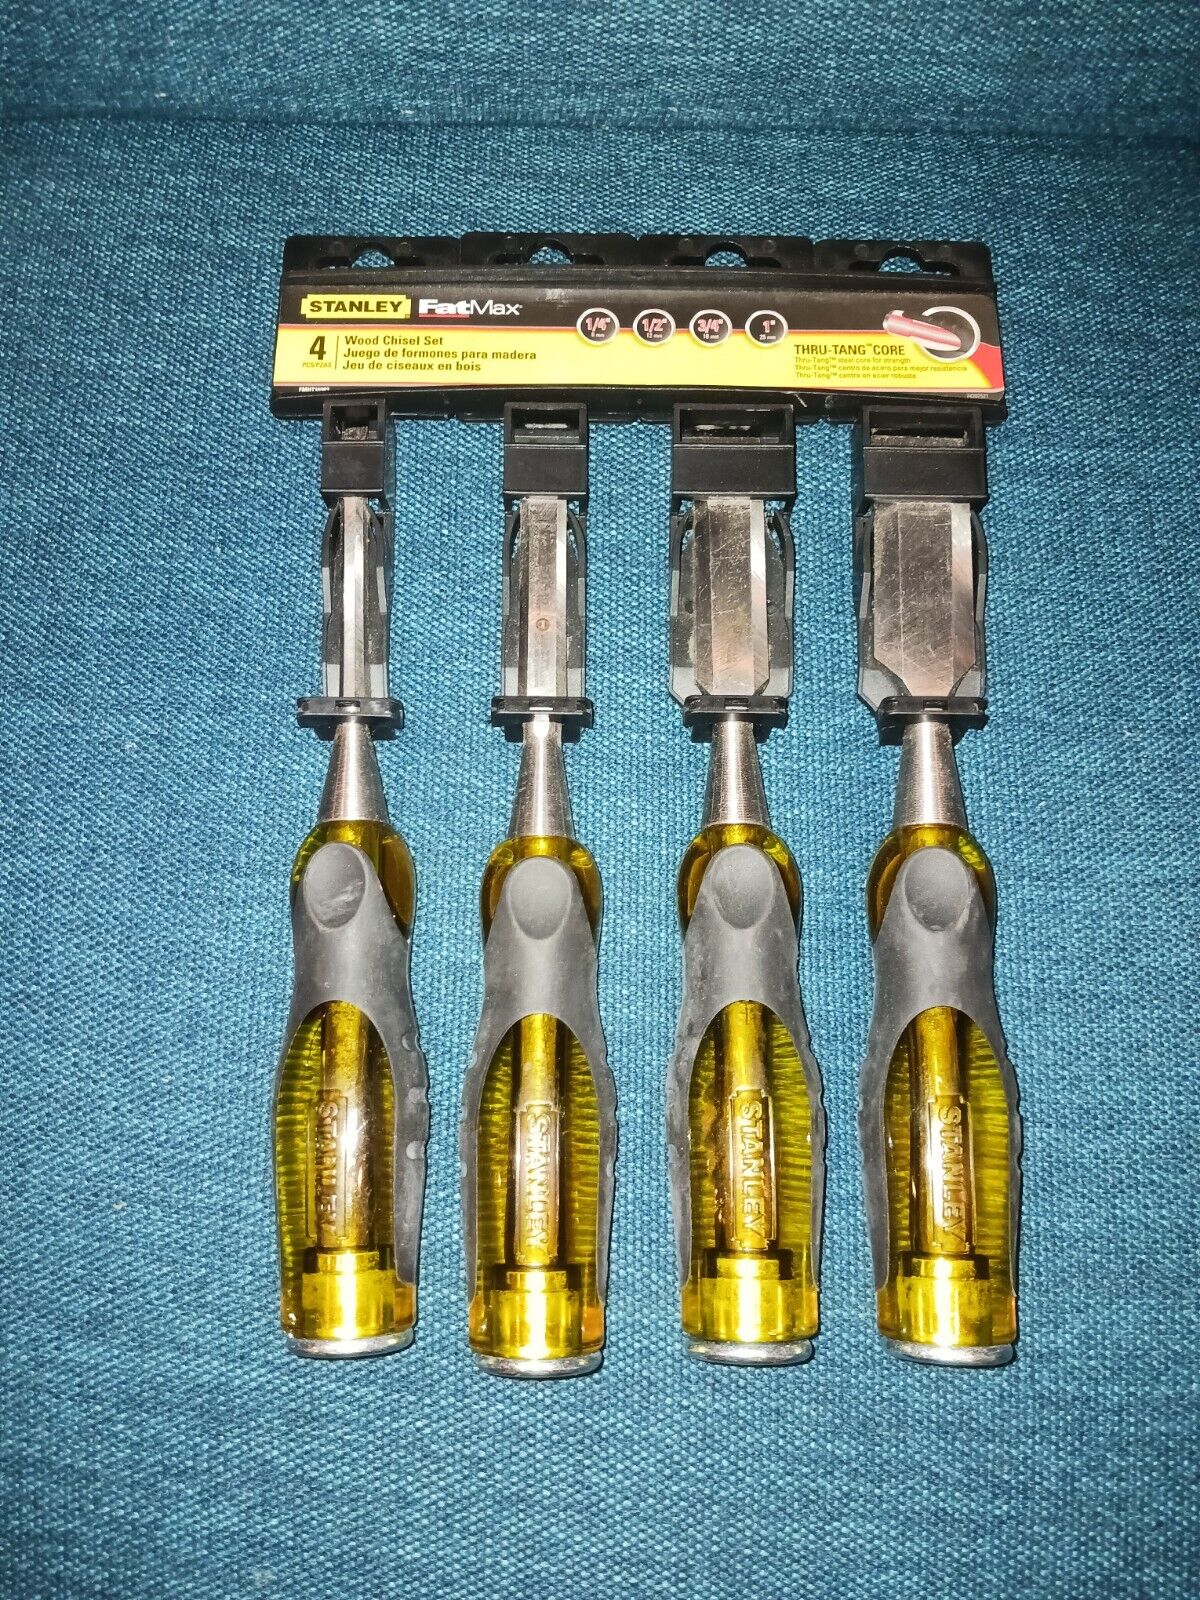 New Stanley Fat Max 4 Pc Wood Chisel Set Through Tang Core